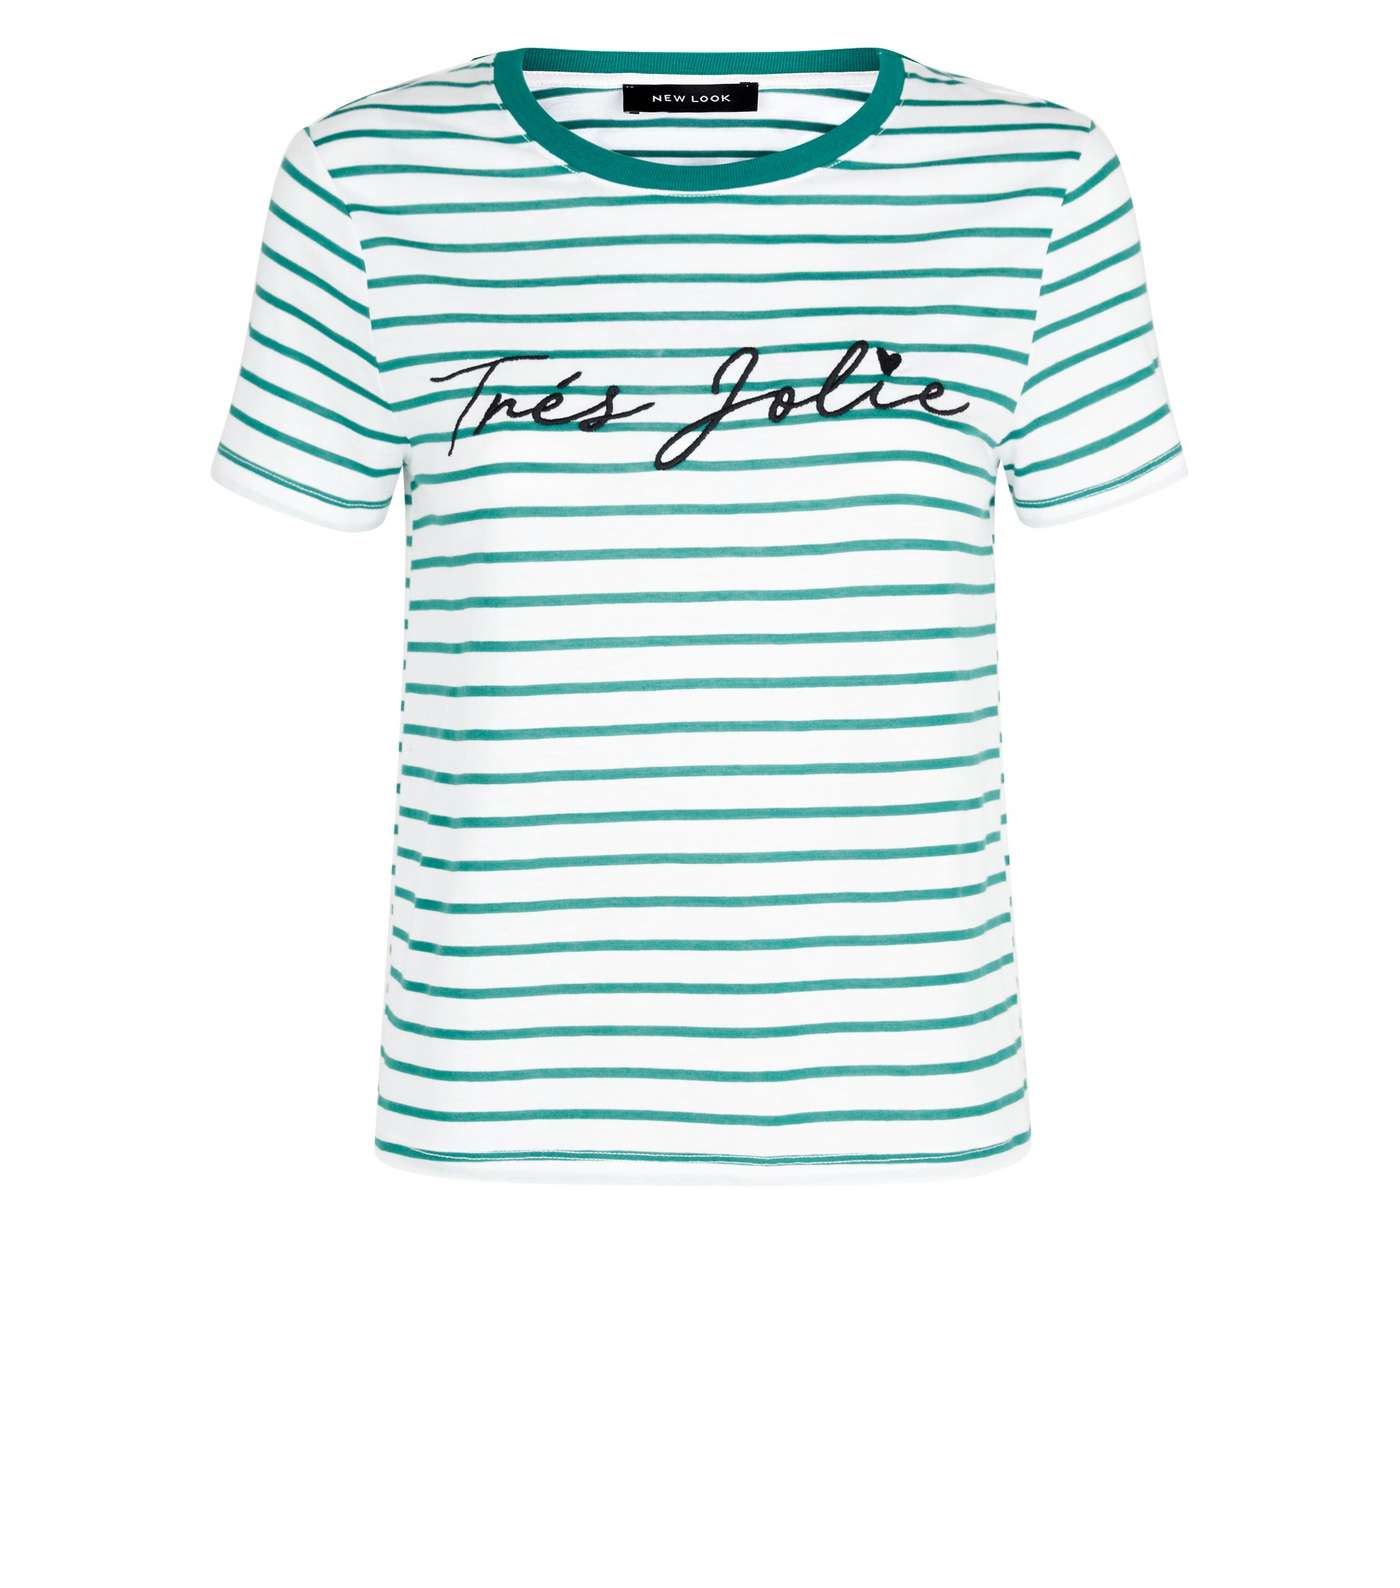 Green Stripe Tres Jolie Embroidered T-Shirt Image 4